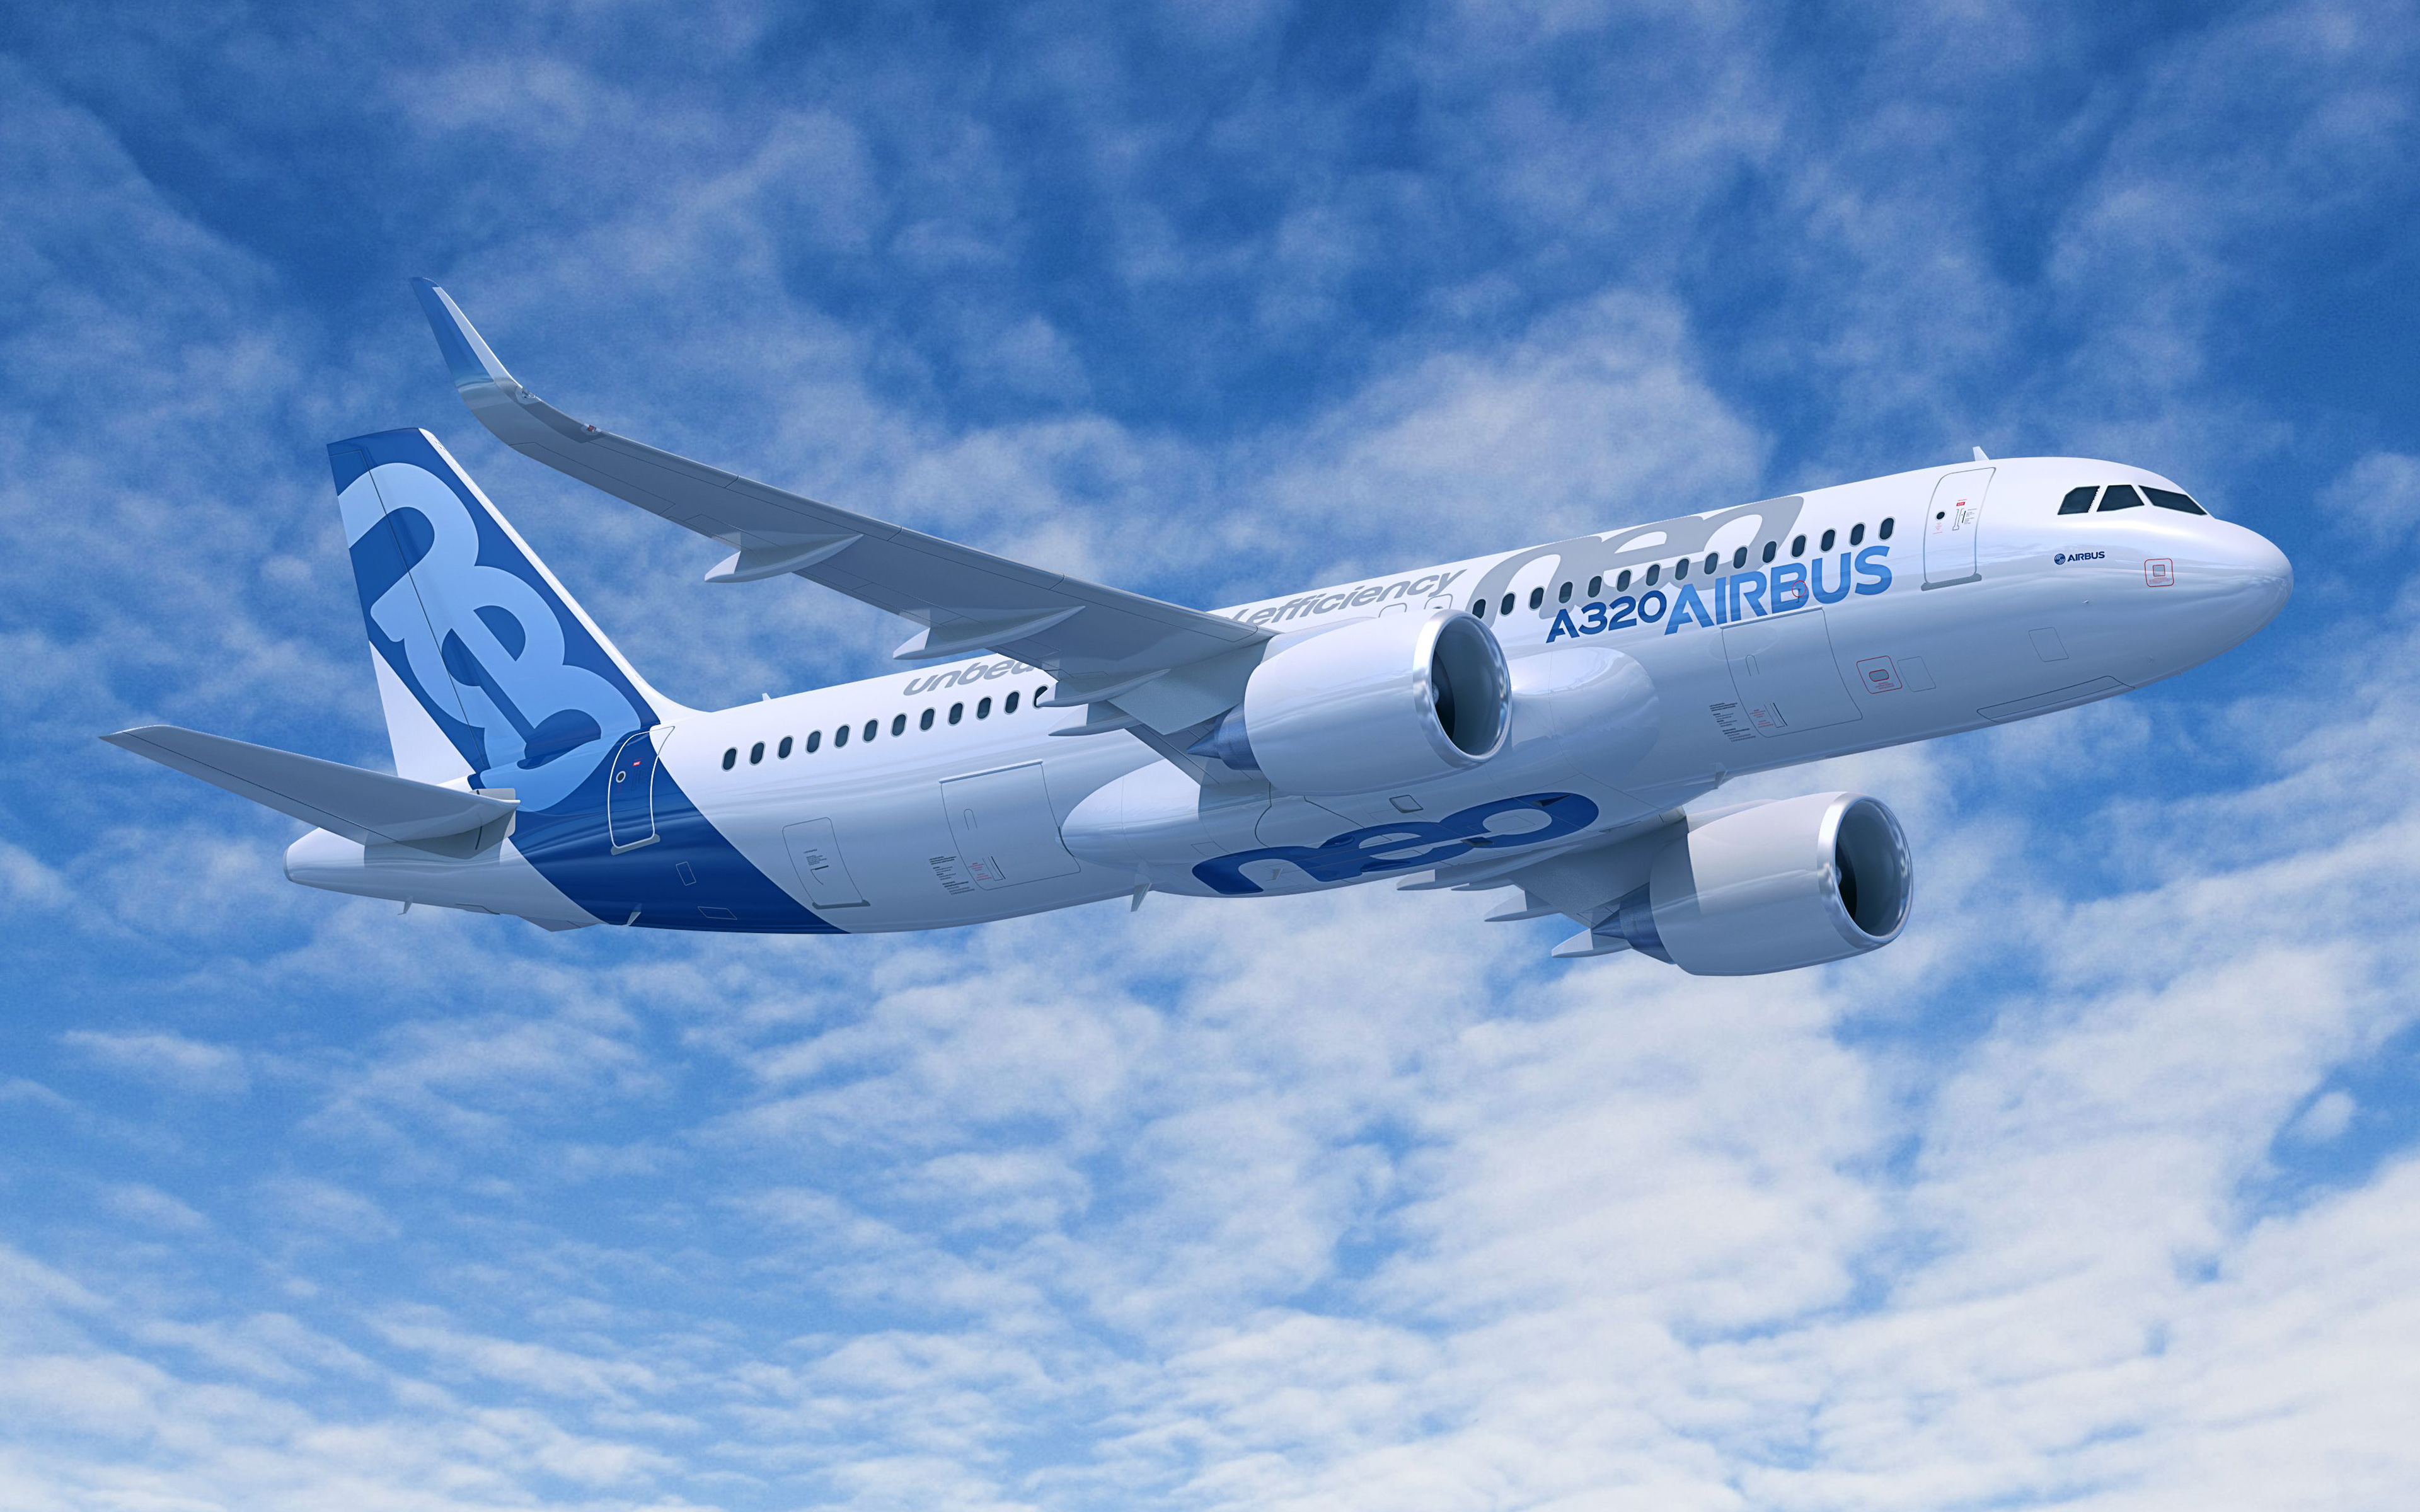 Wallpaper Airbus A320neo Passenger Plane New Airplanes